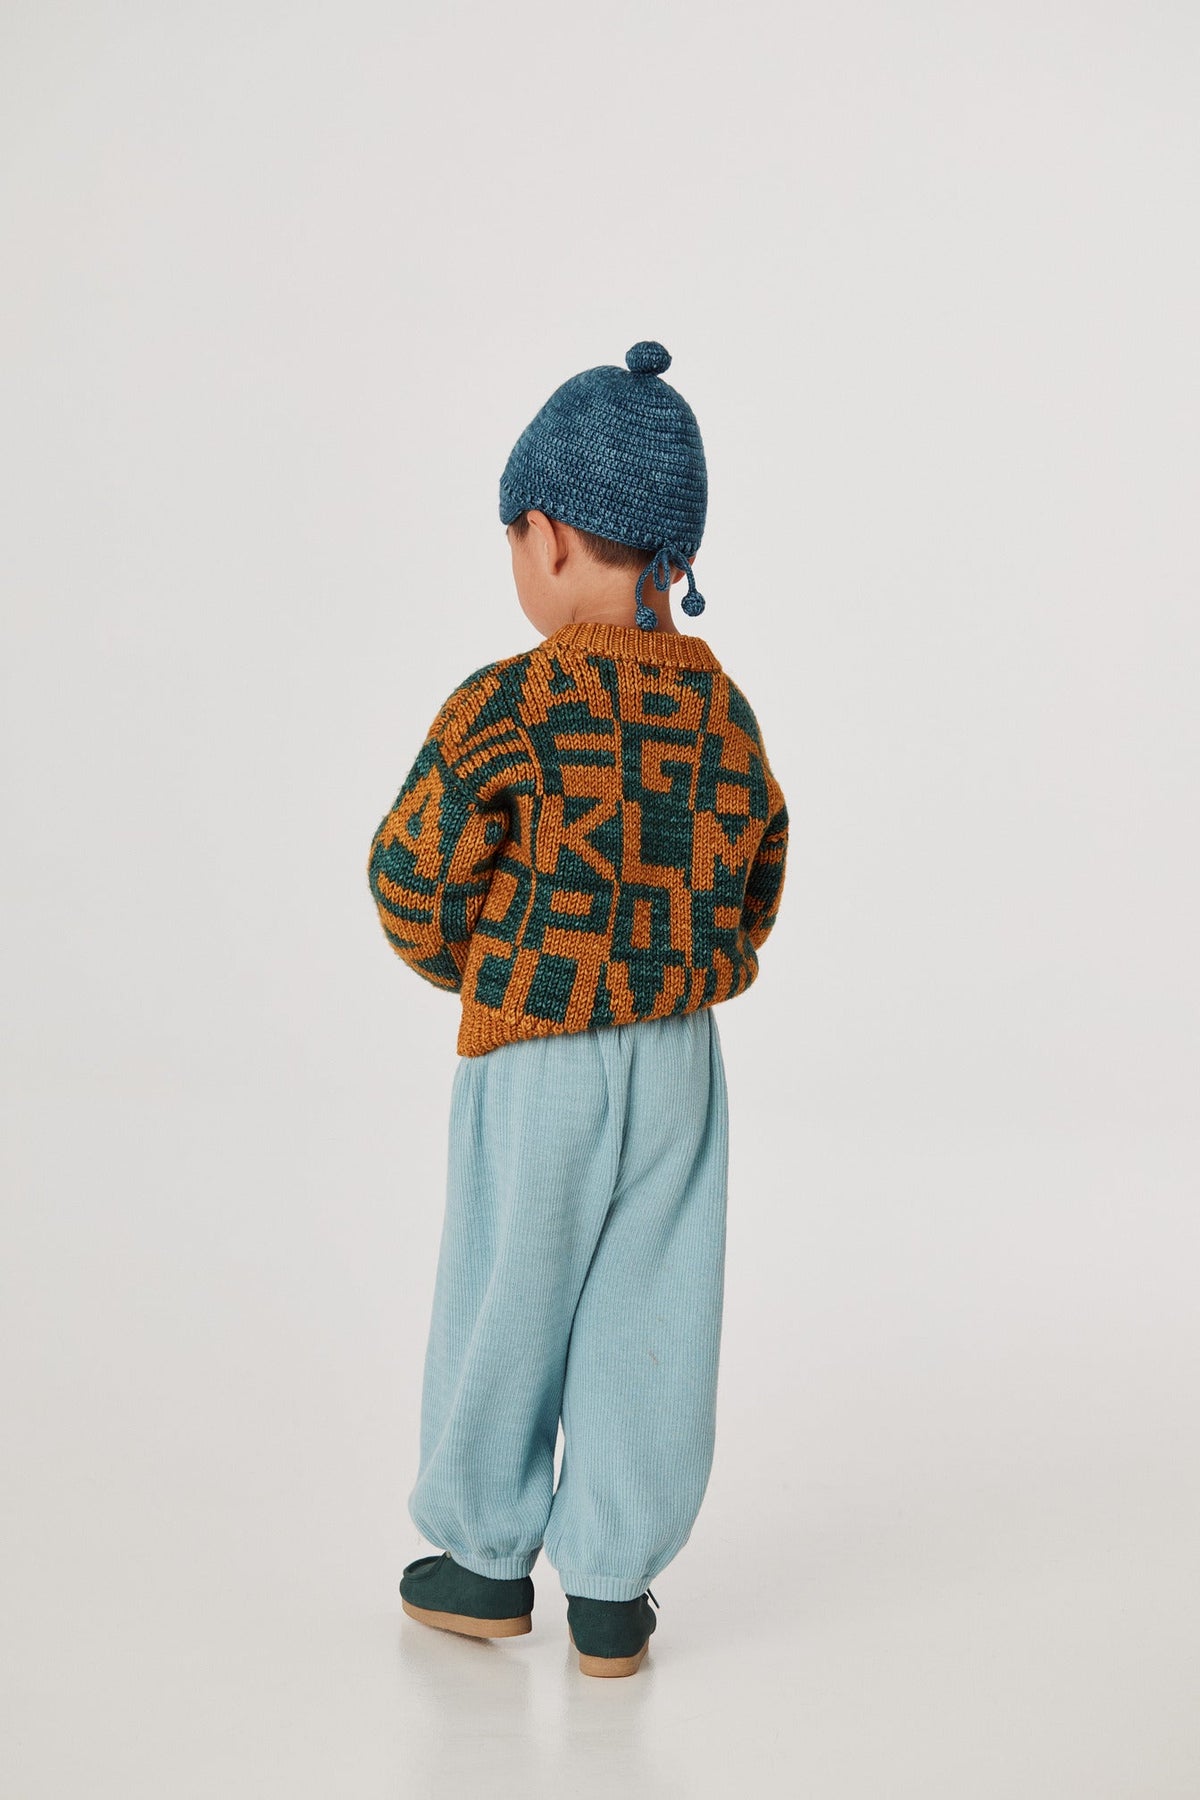 Alphabet Intarsia Sweater - Marigold+Model is 39 inches tall, 32lbs, wearing a size 3-4y